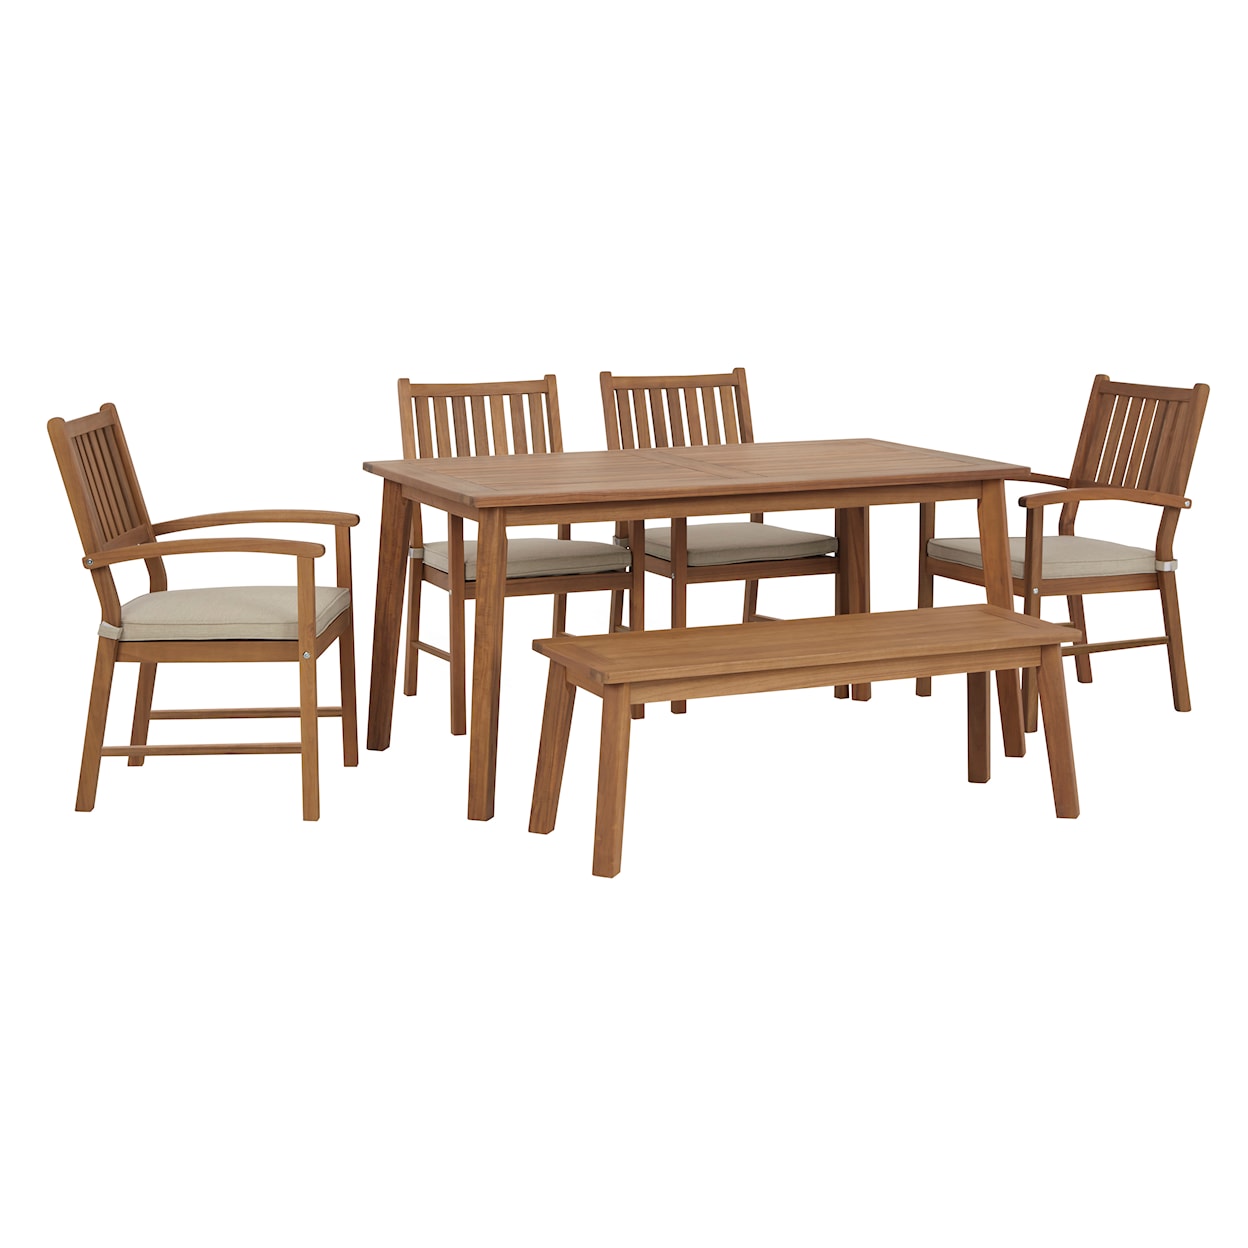 Signature Design by Ashley Janiyah Outdoor Dining Table w/ 4 Chairs & Bench